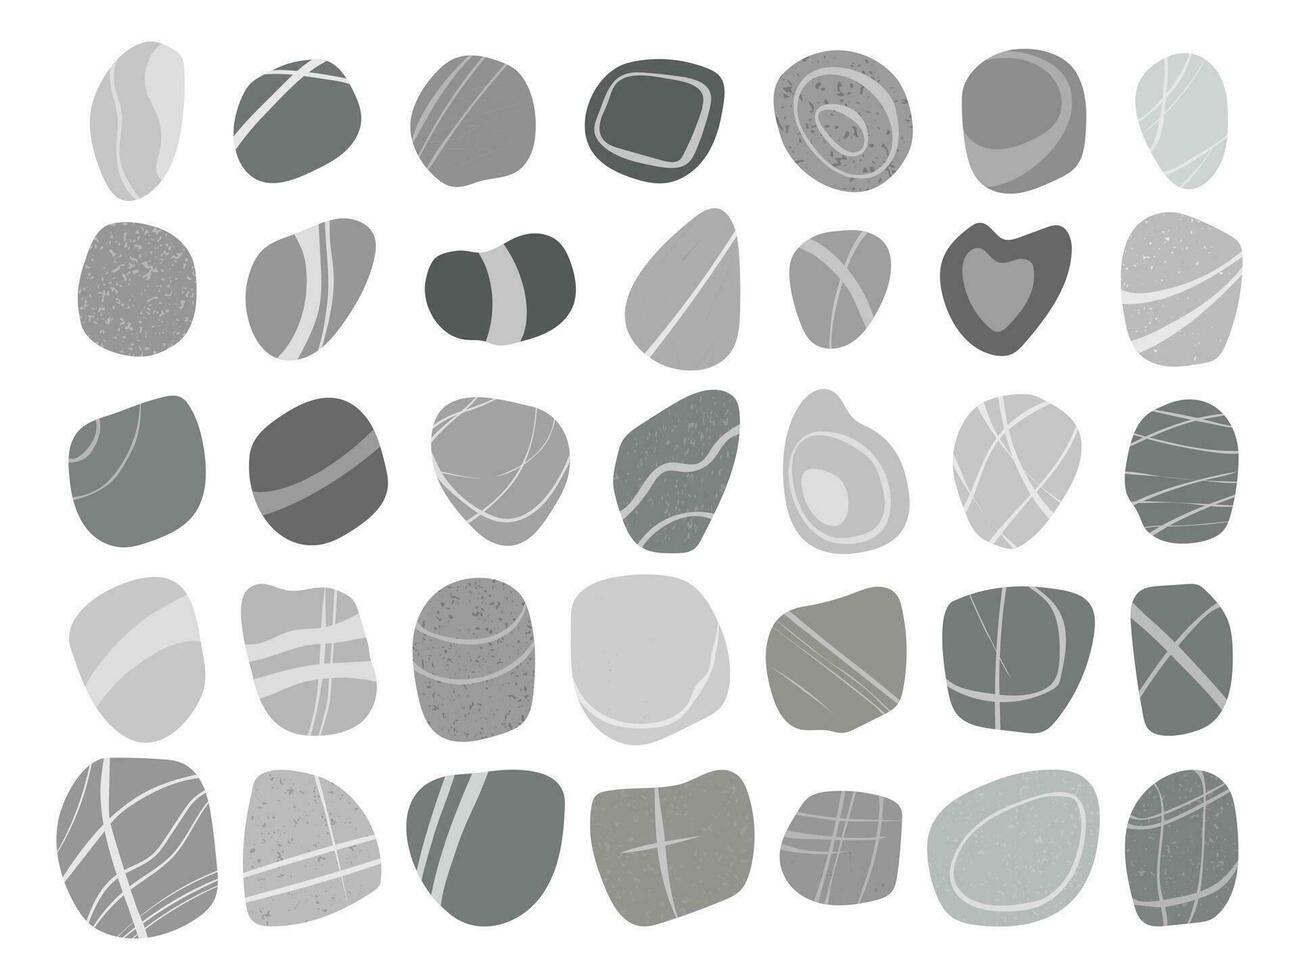 Flat sea monochrome pebbles collection isolated on white background. Every stone is different. Vector